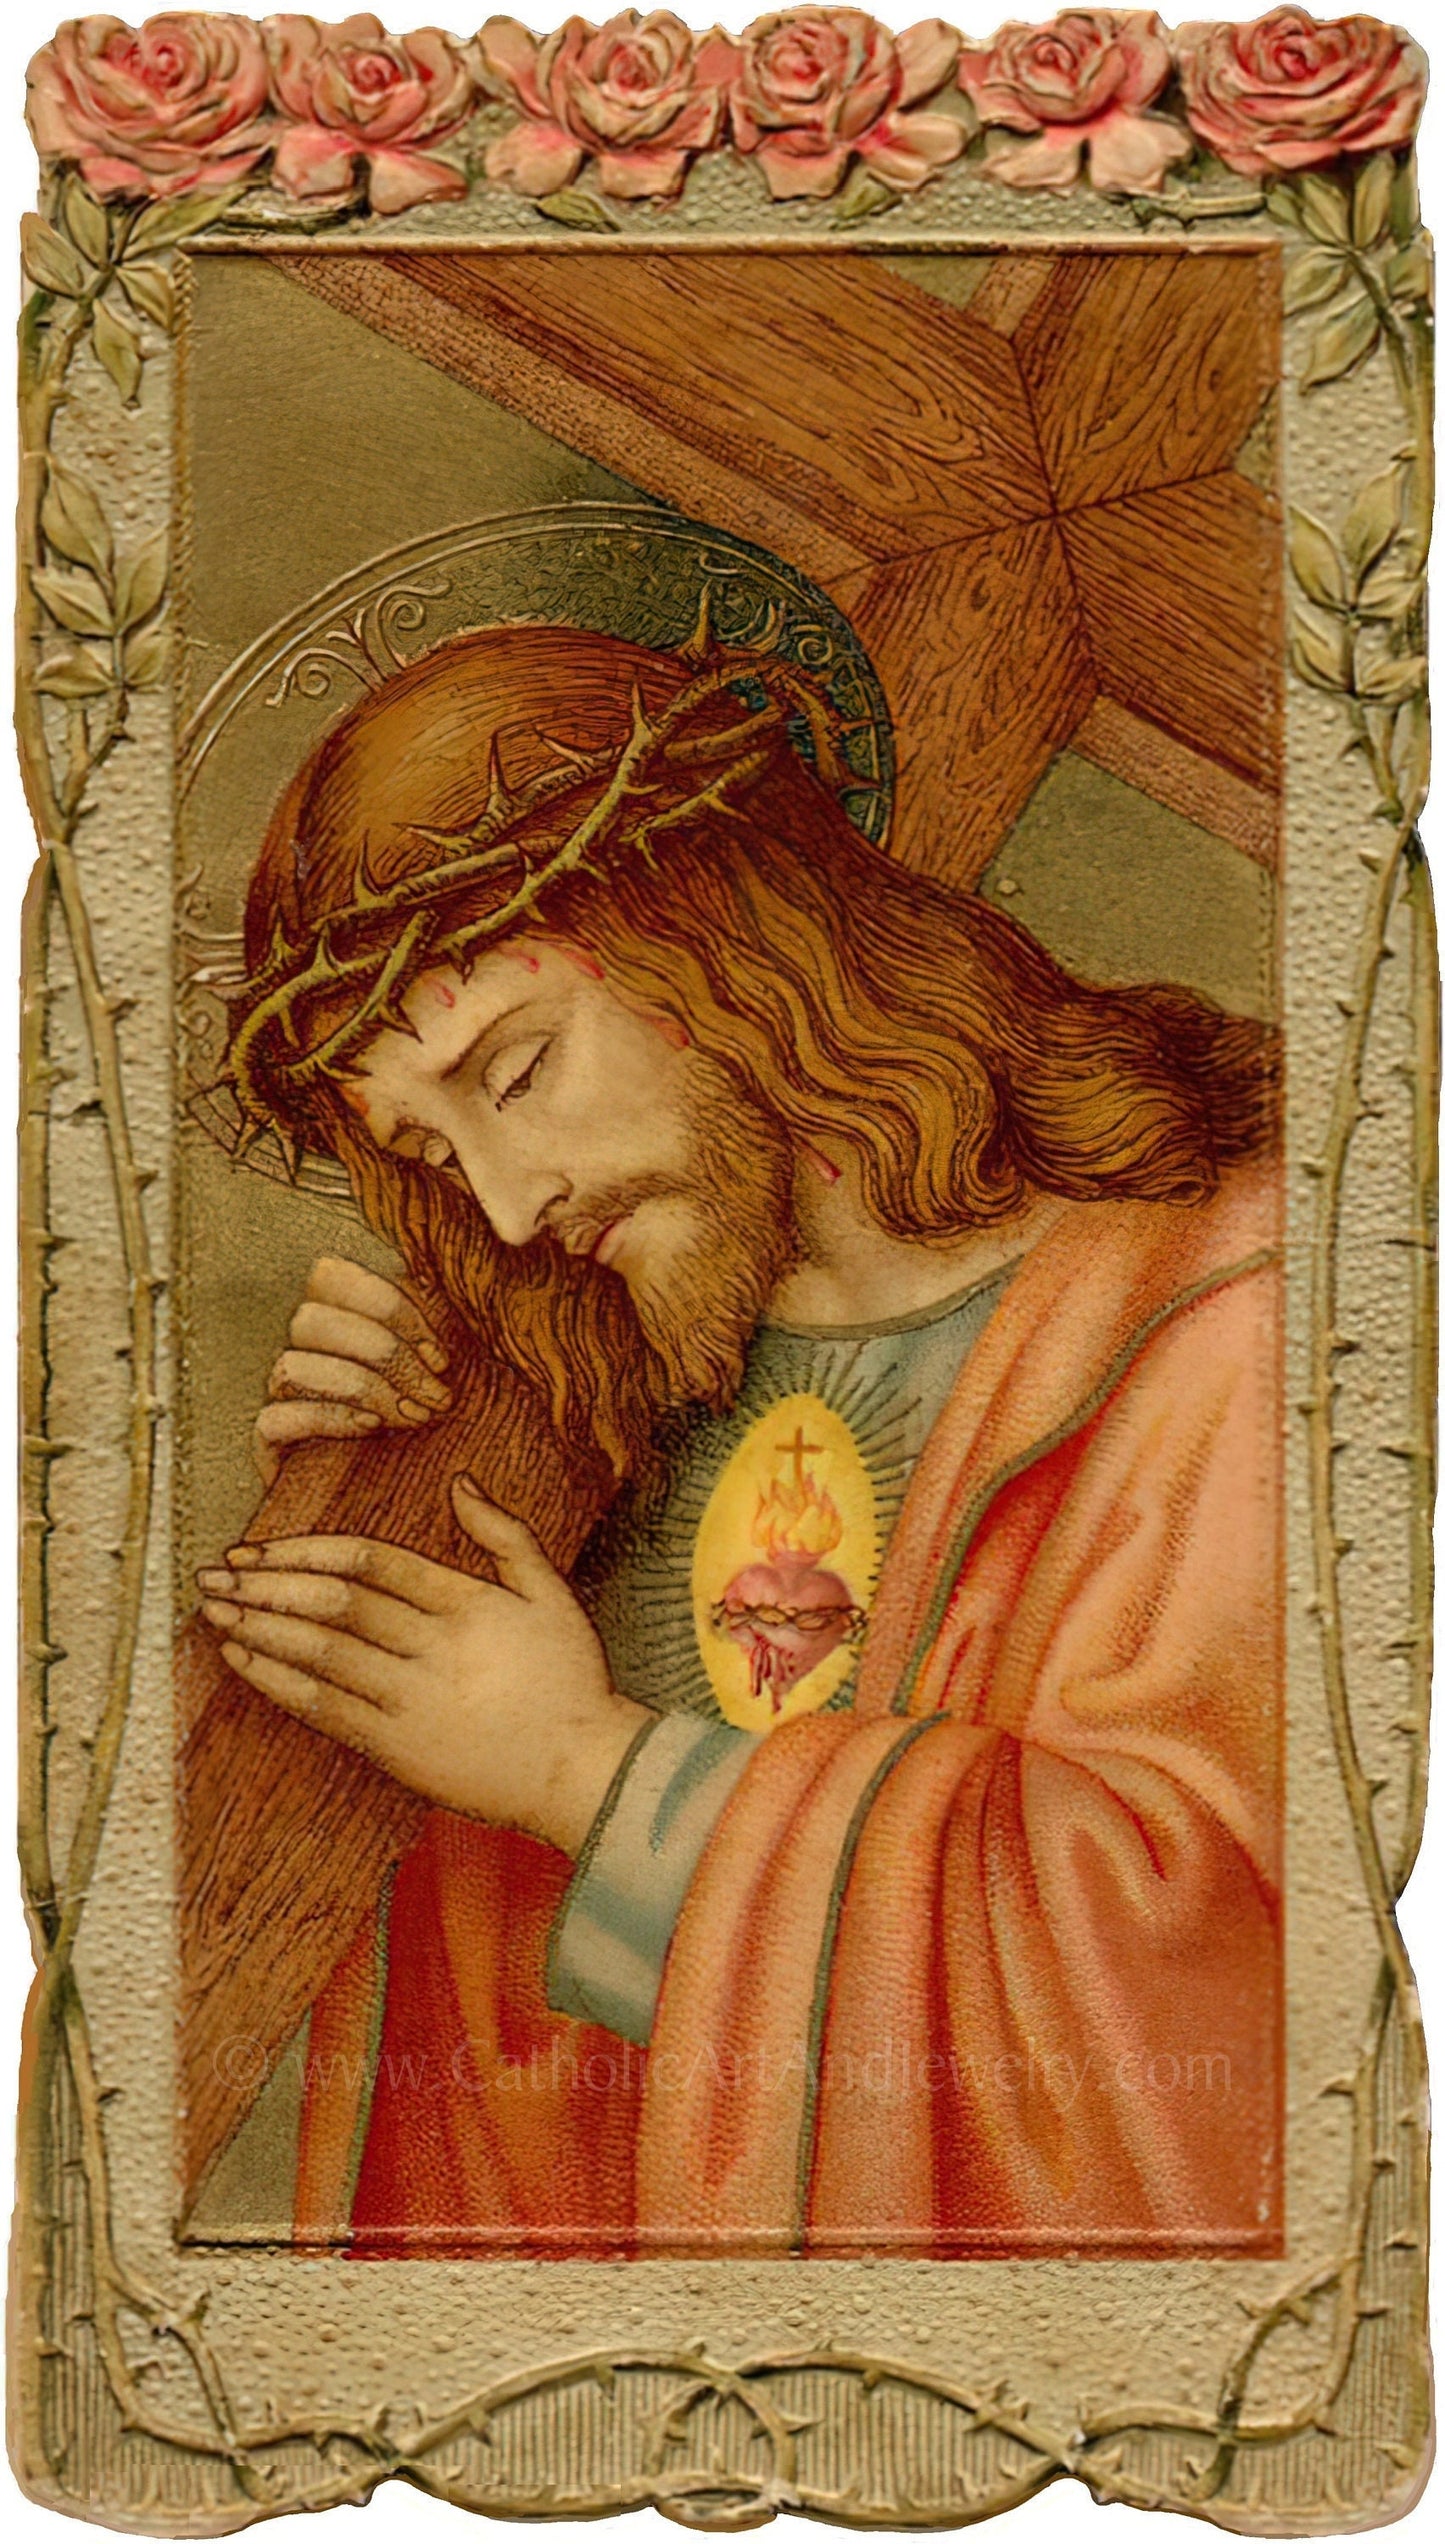 Carrying of the Cross – 2 sizes – Based on a Vintage German Holy Card